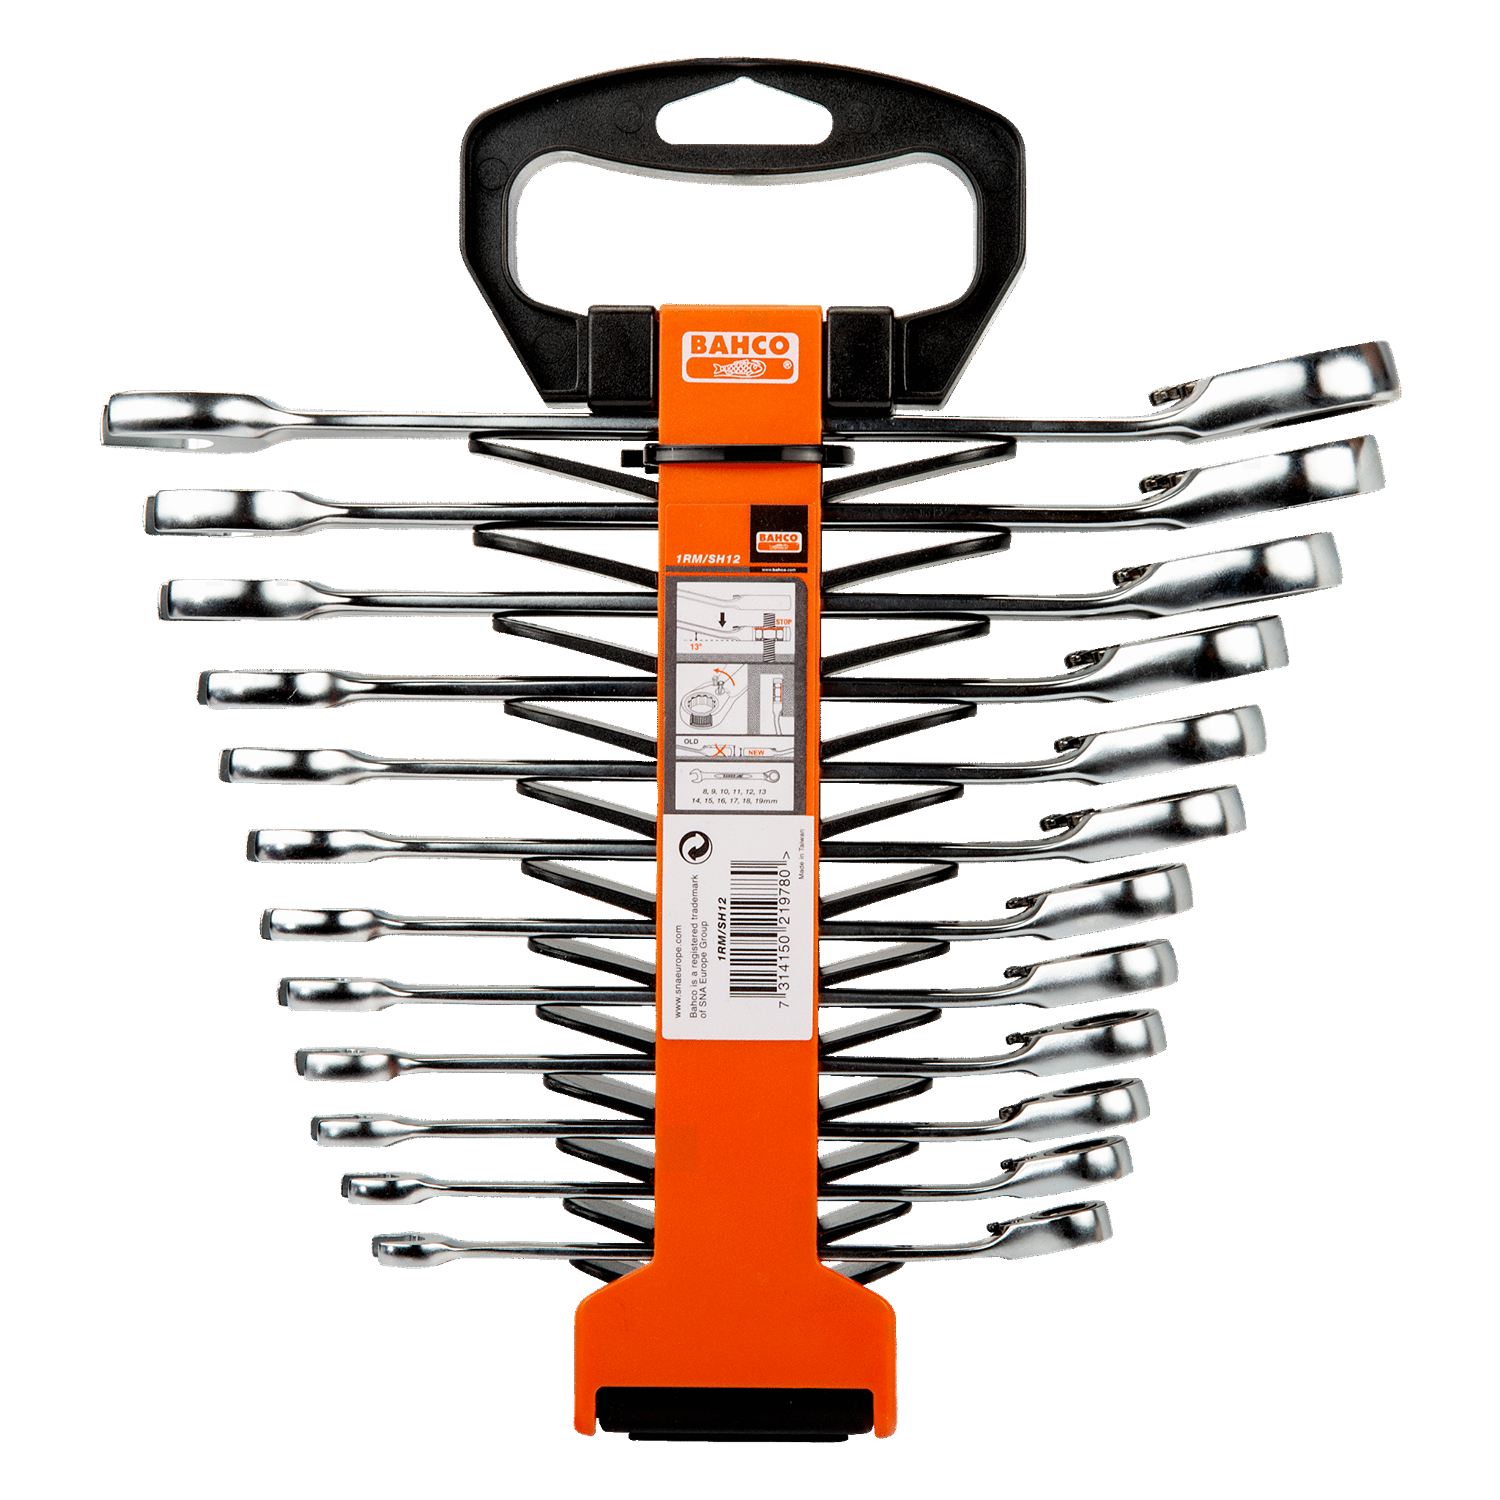 BAHCO 1RM/SH12 Metric Combination Ratcheting Wrench Set - 12 Pcs - Premium Combination Ratcheting Wrench Set from BAHCO - Shop now at Yew Aik.